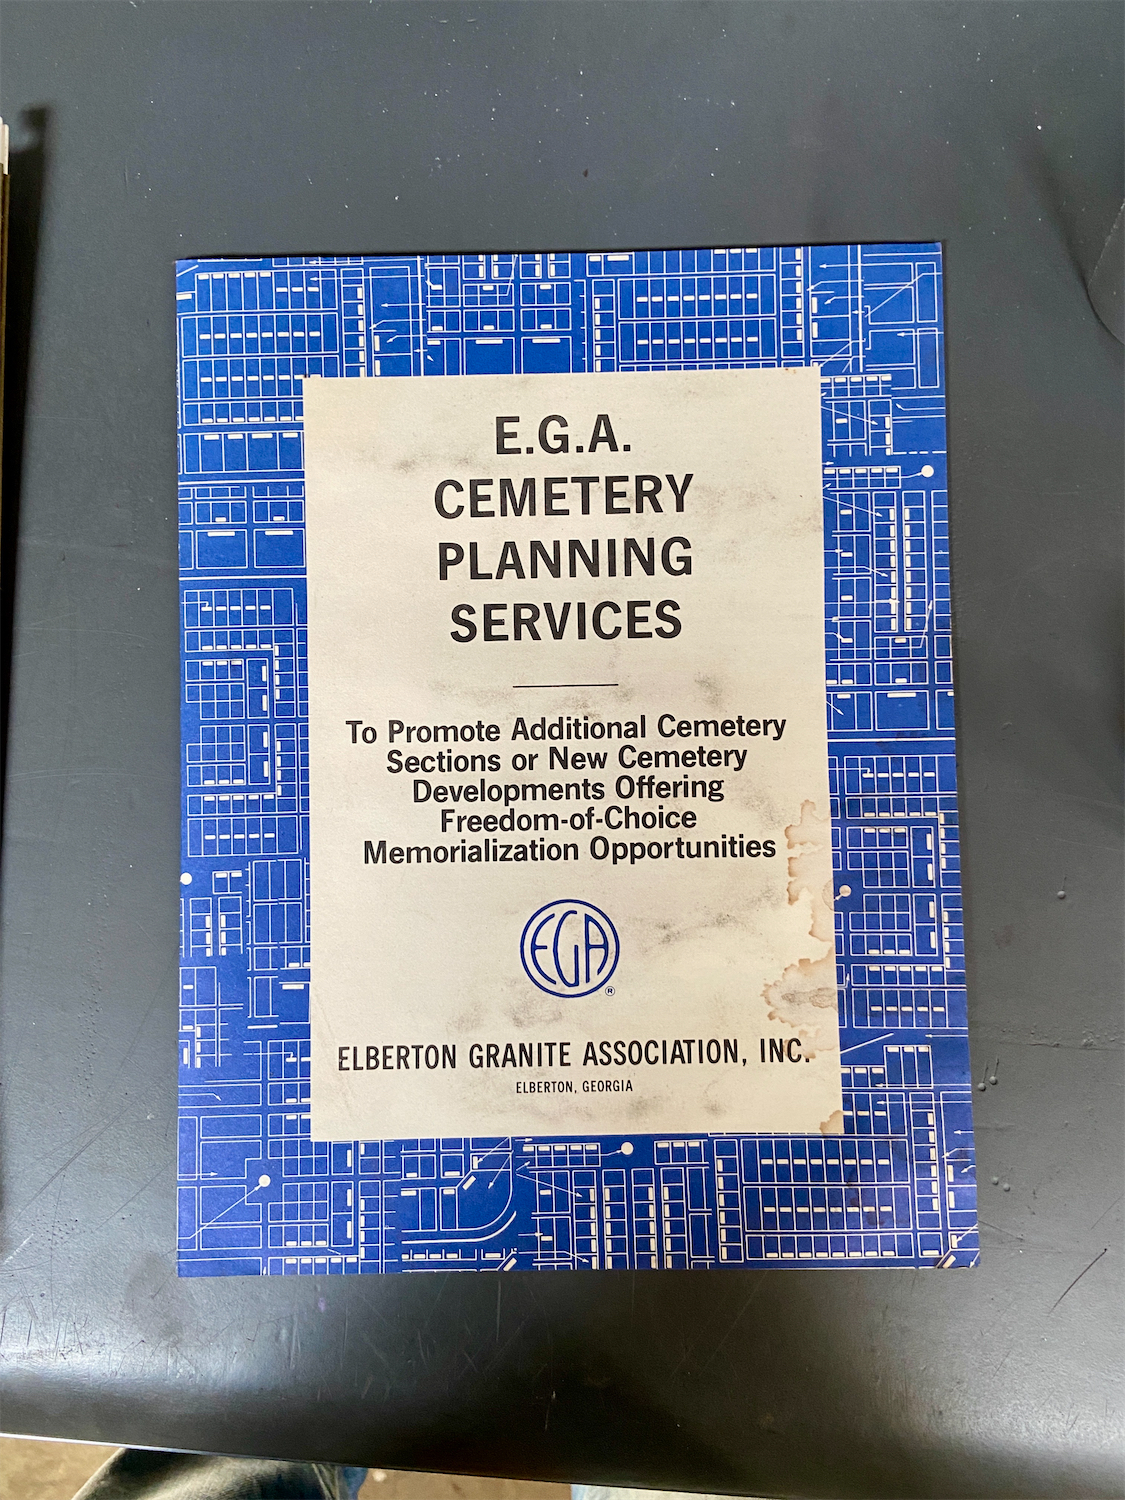 A brochure, likely from the mid 20th century, titled E.G.A. Cemetery Planning Services.